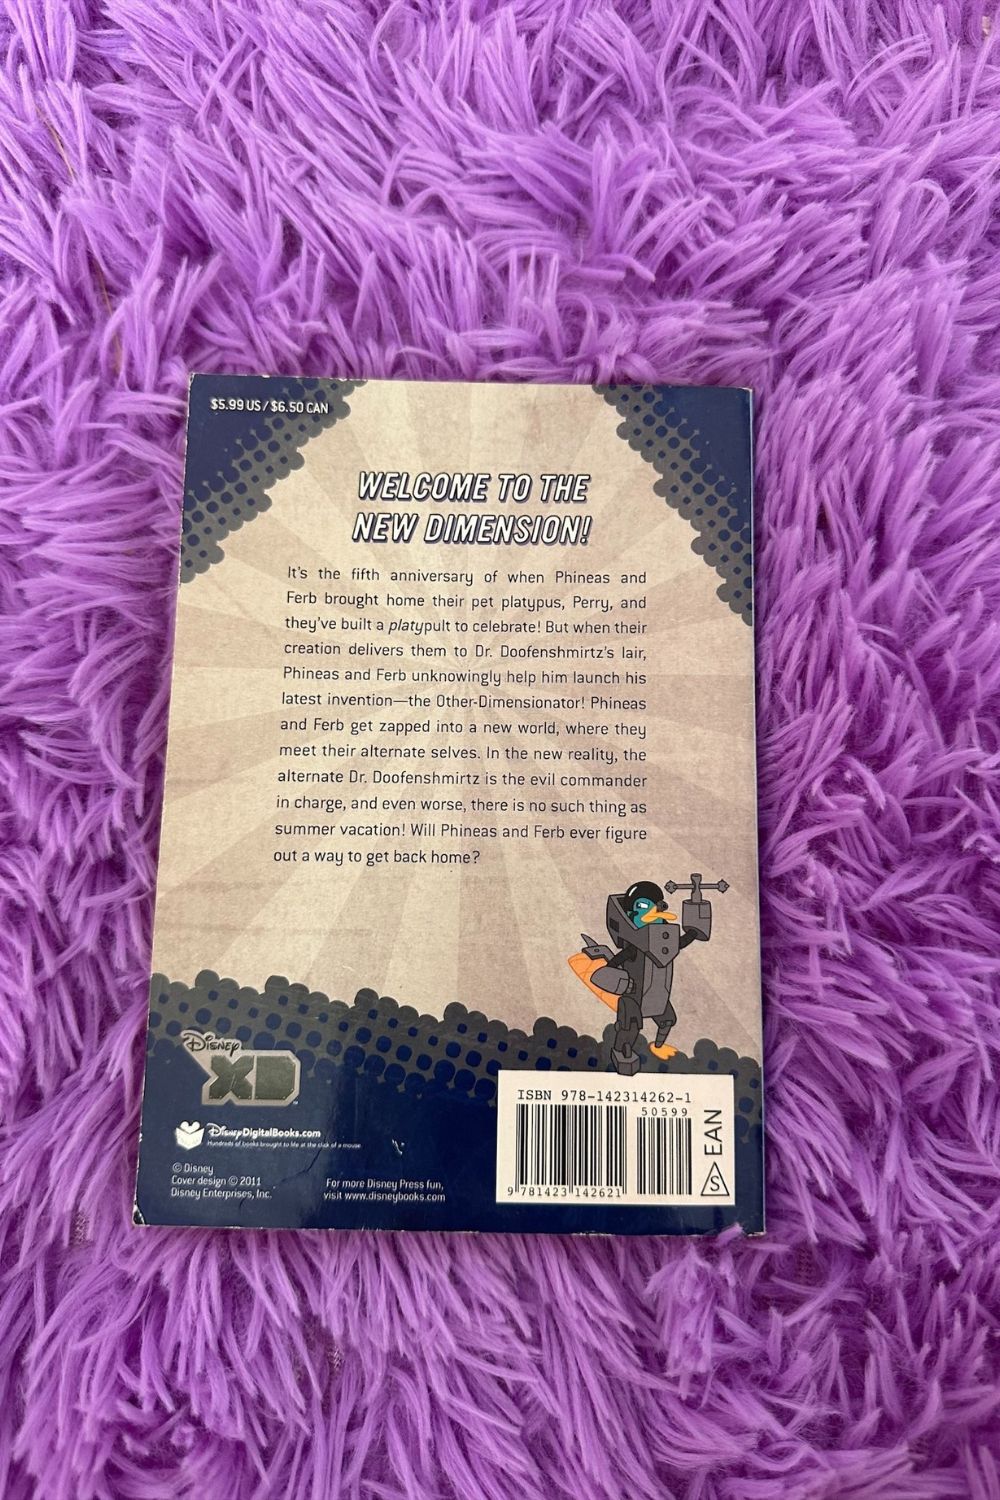 PHINEAS AND FERB ACROSS THE 2ND DIMENSION BOOK*